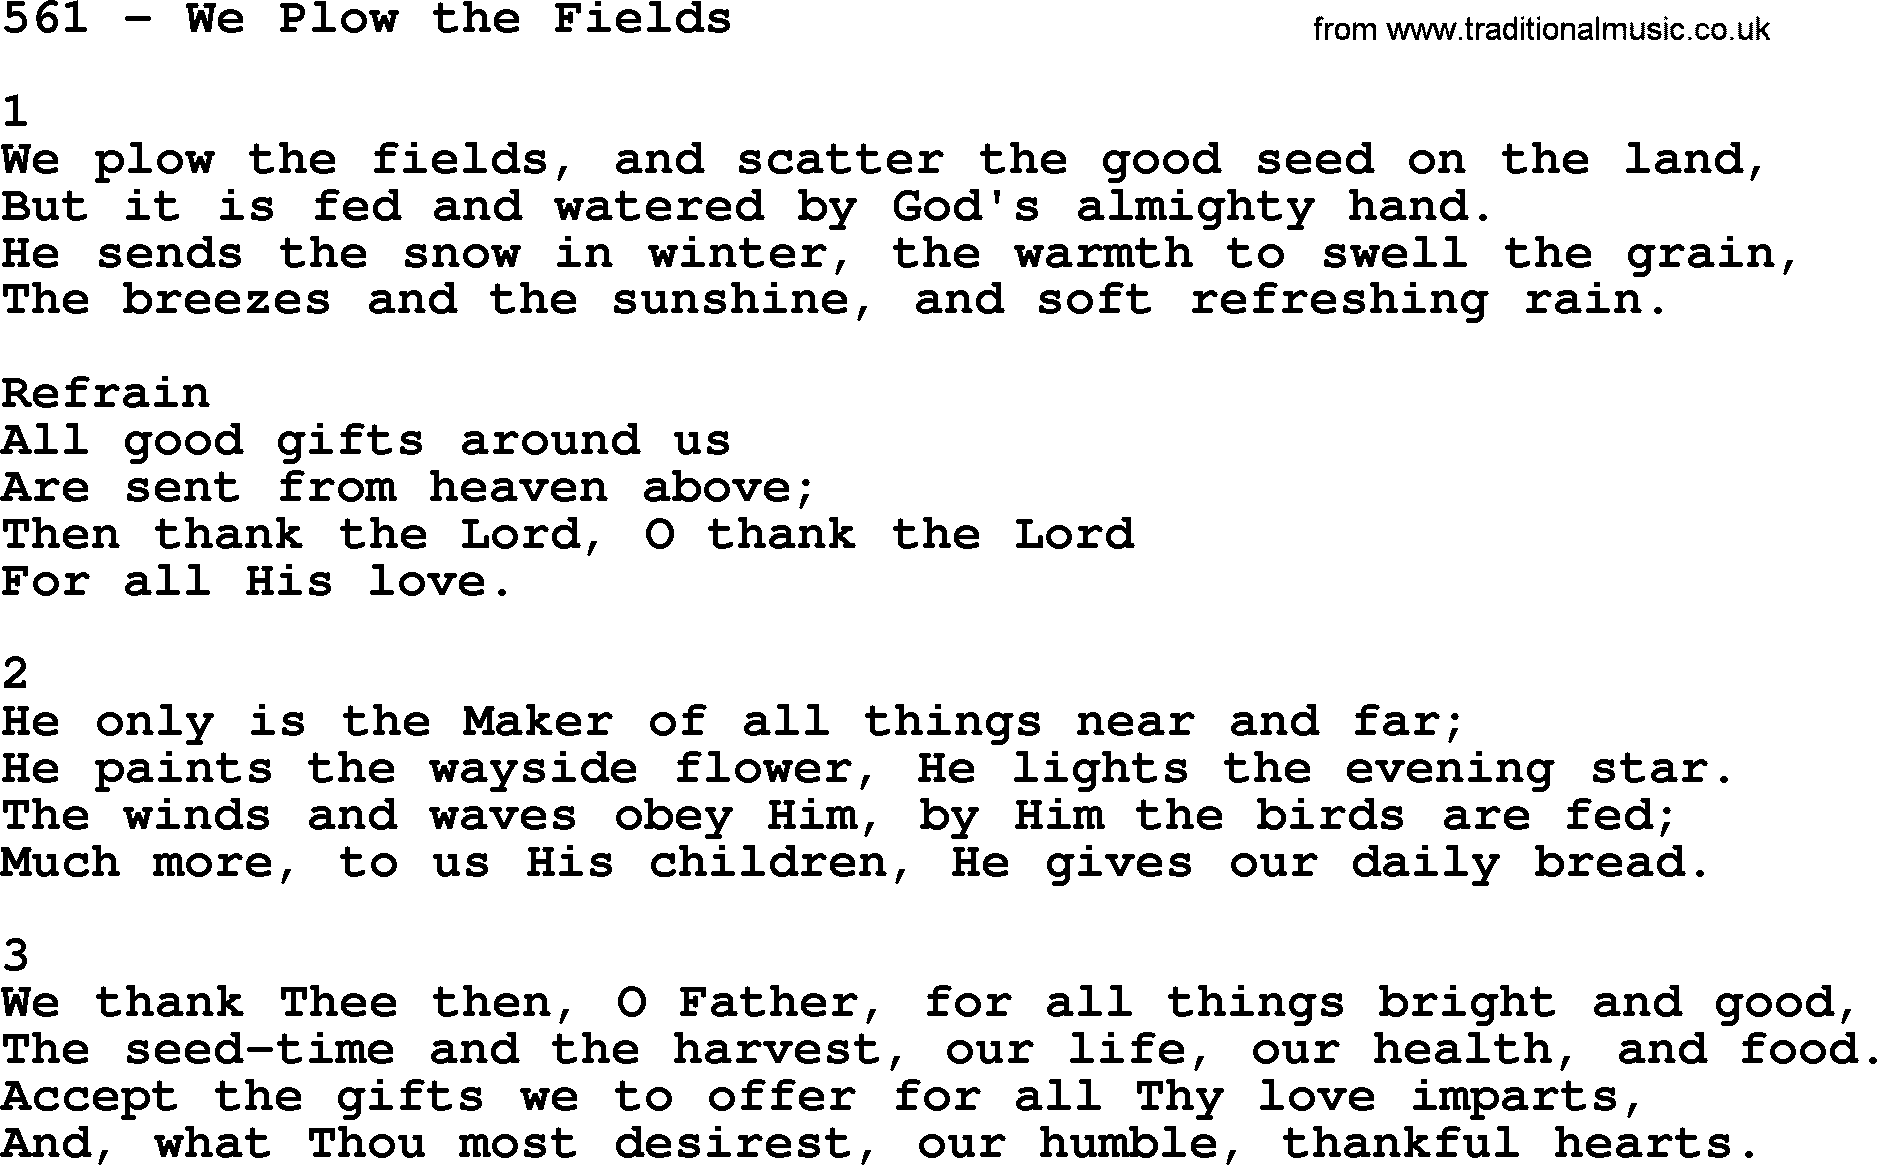 Complete Adventis Hymnal, title: 561-We Plow The Fields, with lyrics, midi, mp3, powerpoints(PPT) and PDF,